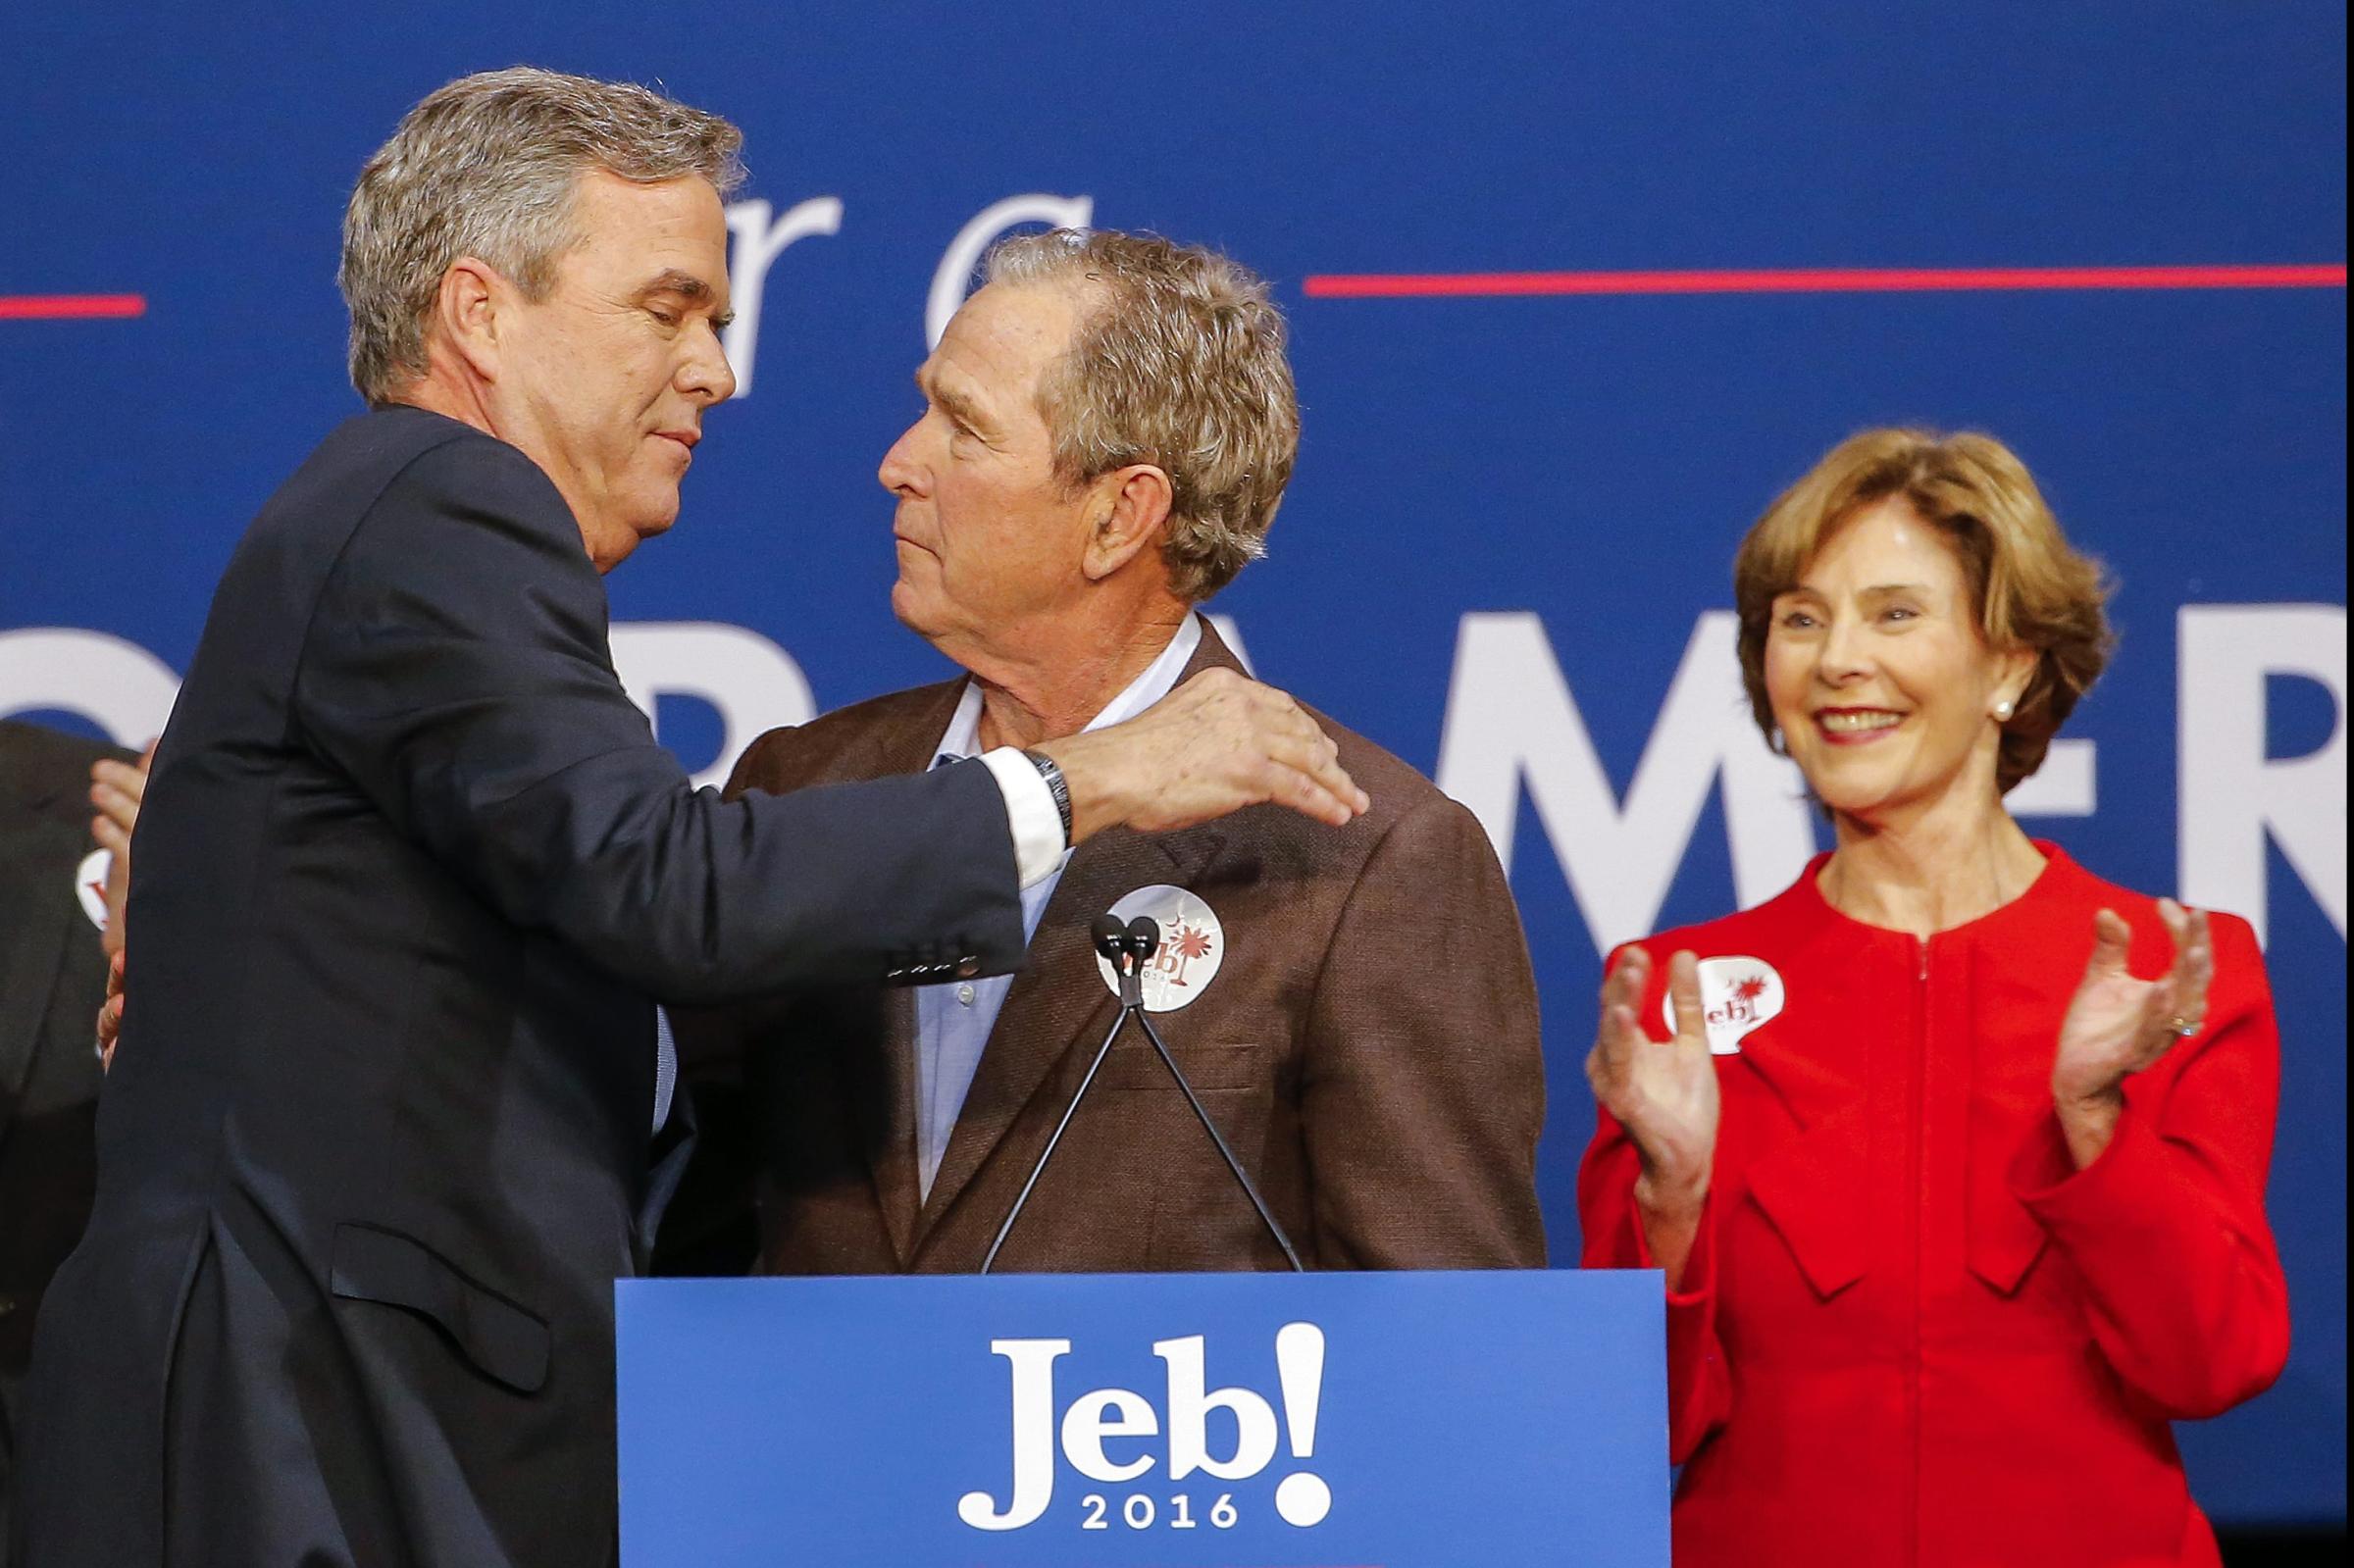 Former Republican presidential candidate Jeb Bush participates in a campaign event with his brother, former President George W. Bush and mother, former First Lady Laura Bush in North Charleston, S.C. on Feb. 15, 2016. Bush dropped out of the presidential race on Saturday.